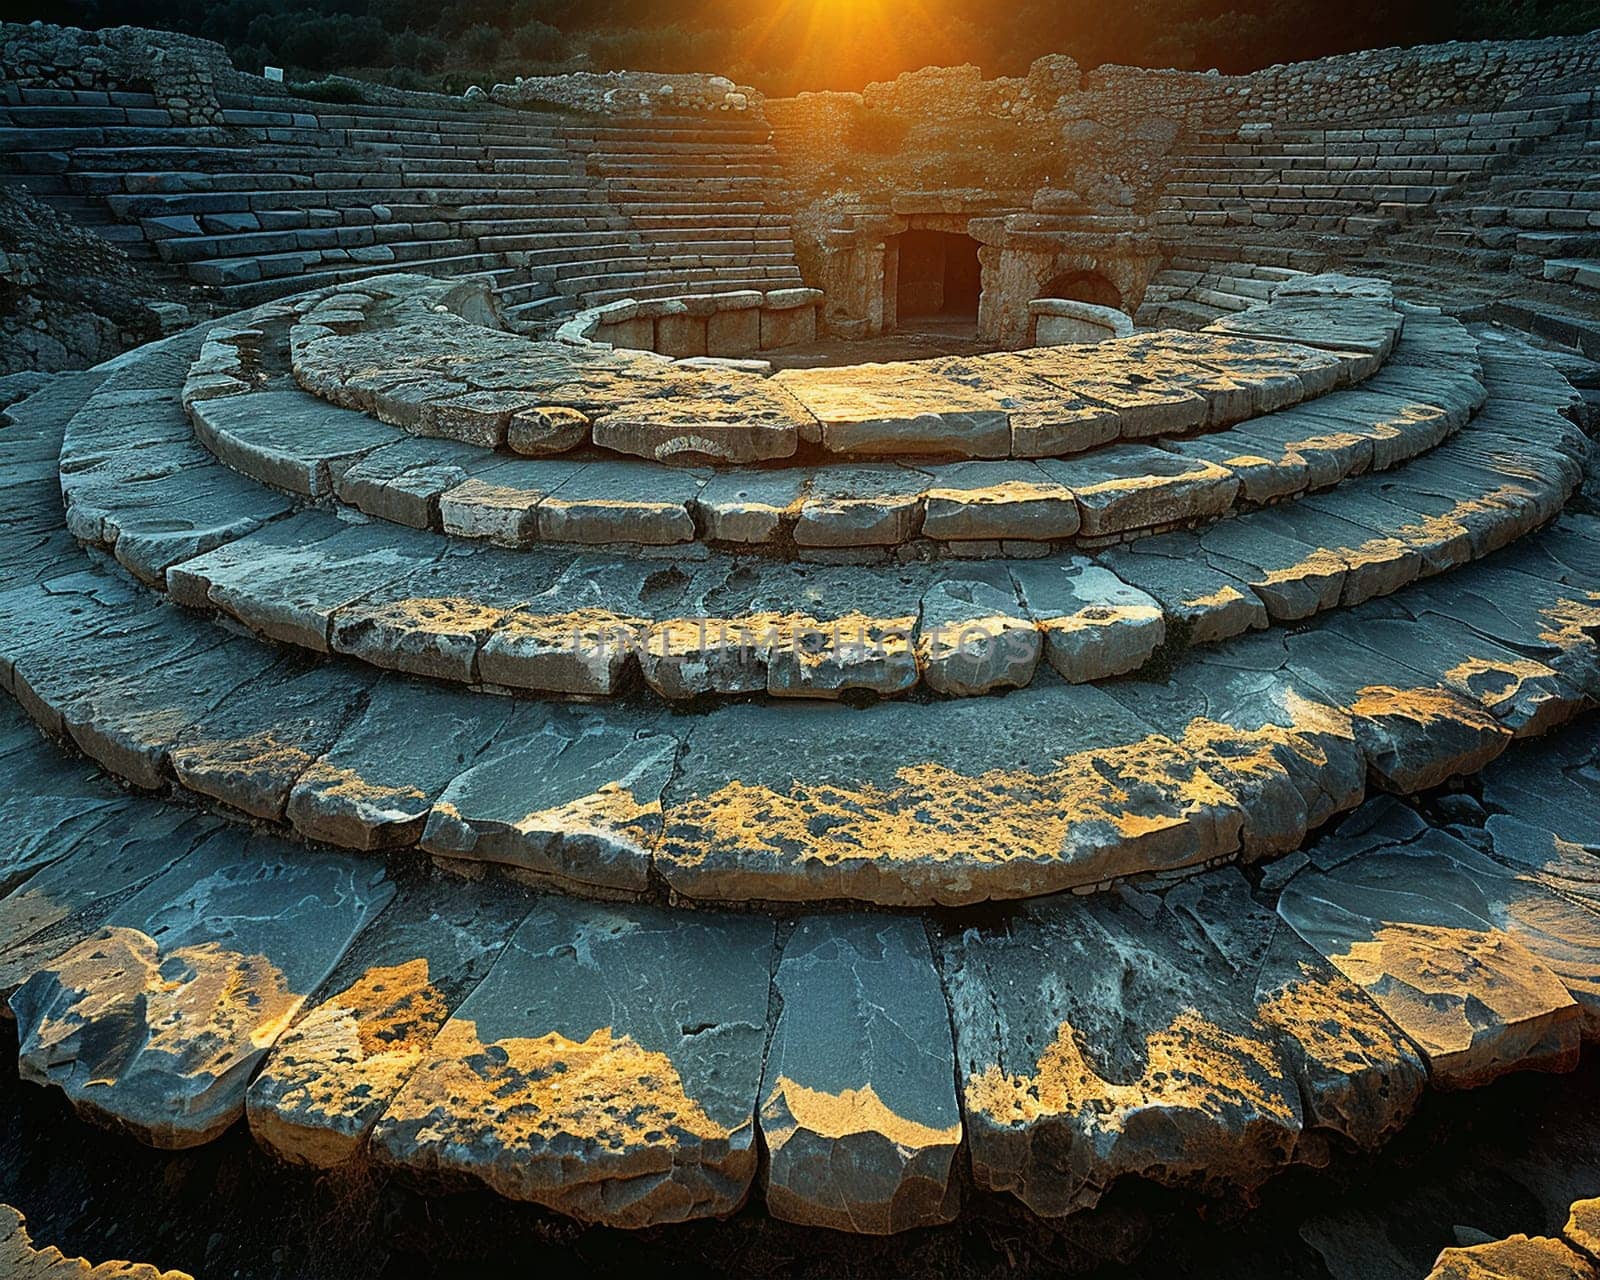 Greek Amphitheater Echoing Ancient Philosophical Debates, The stone tiers blur into a historical venue for thought and discourse.